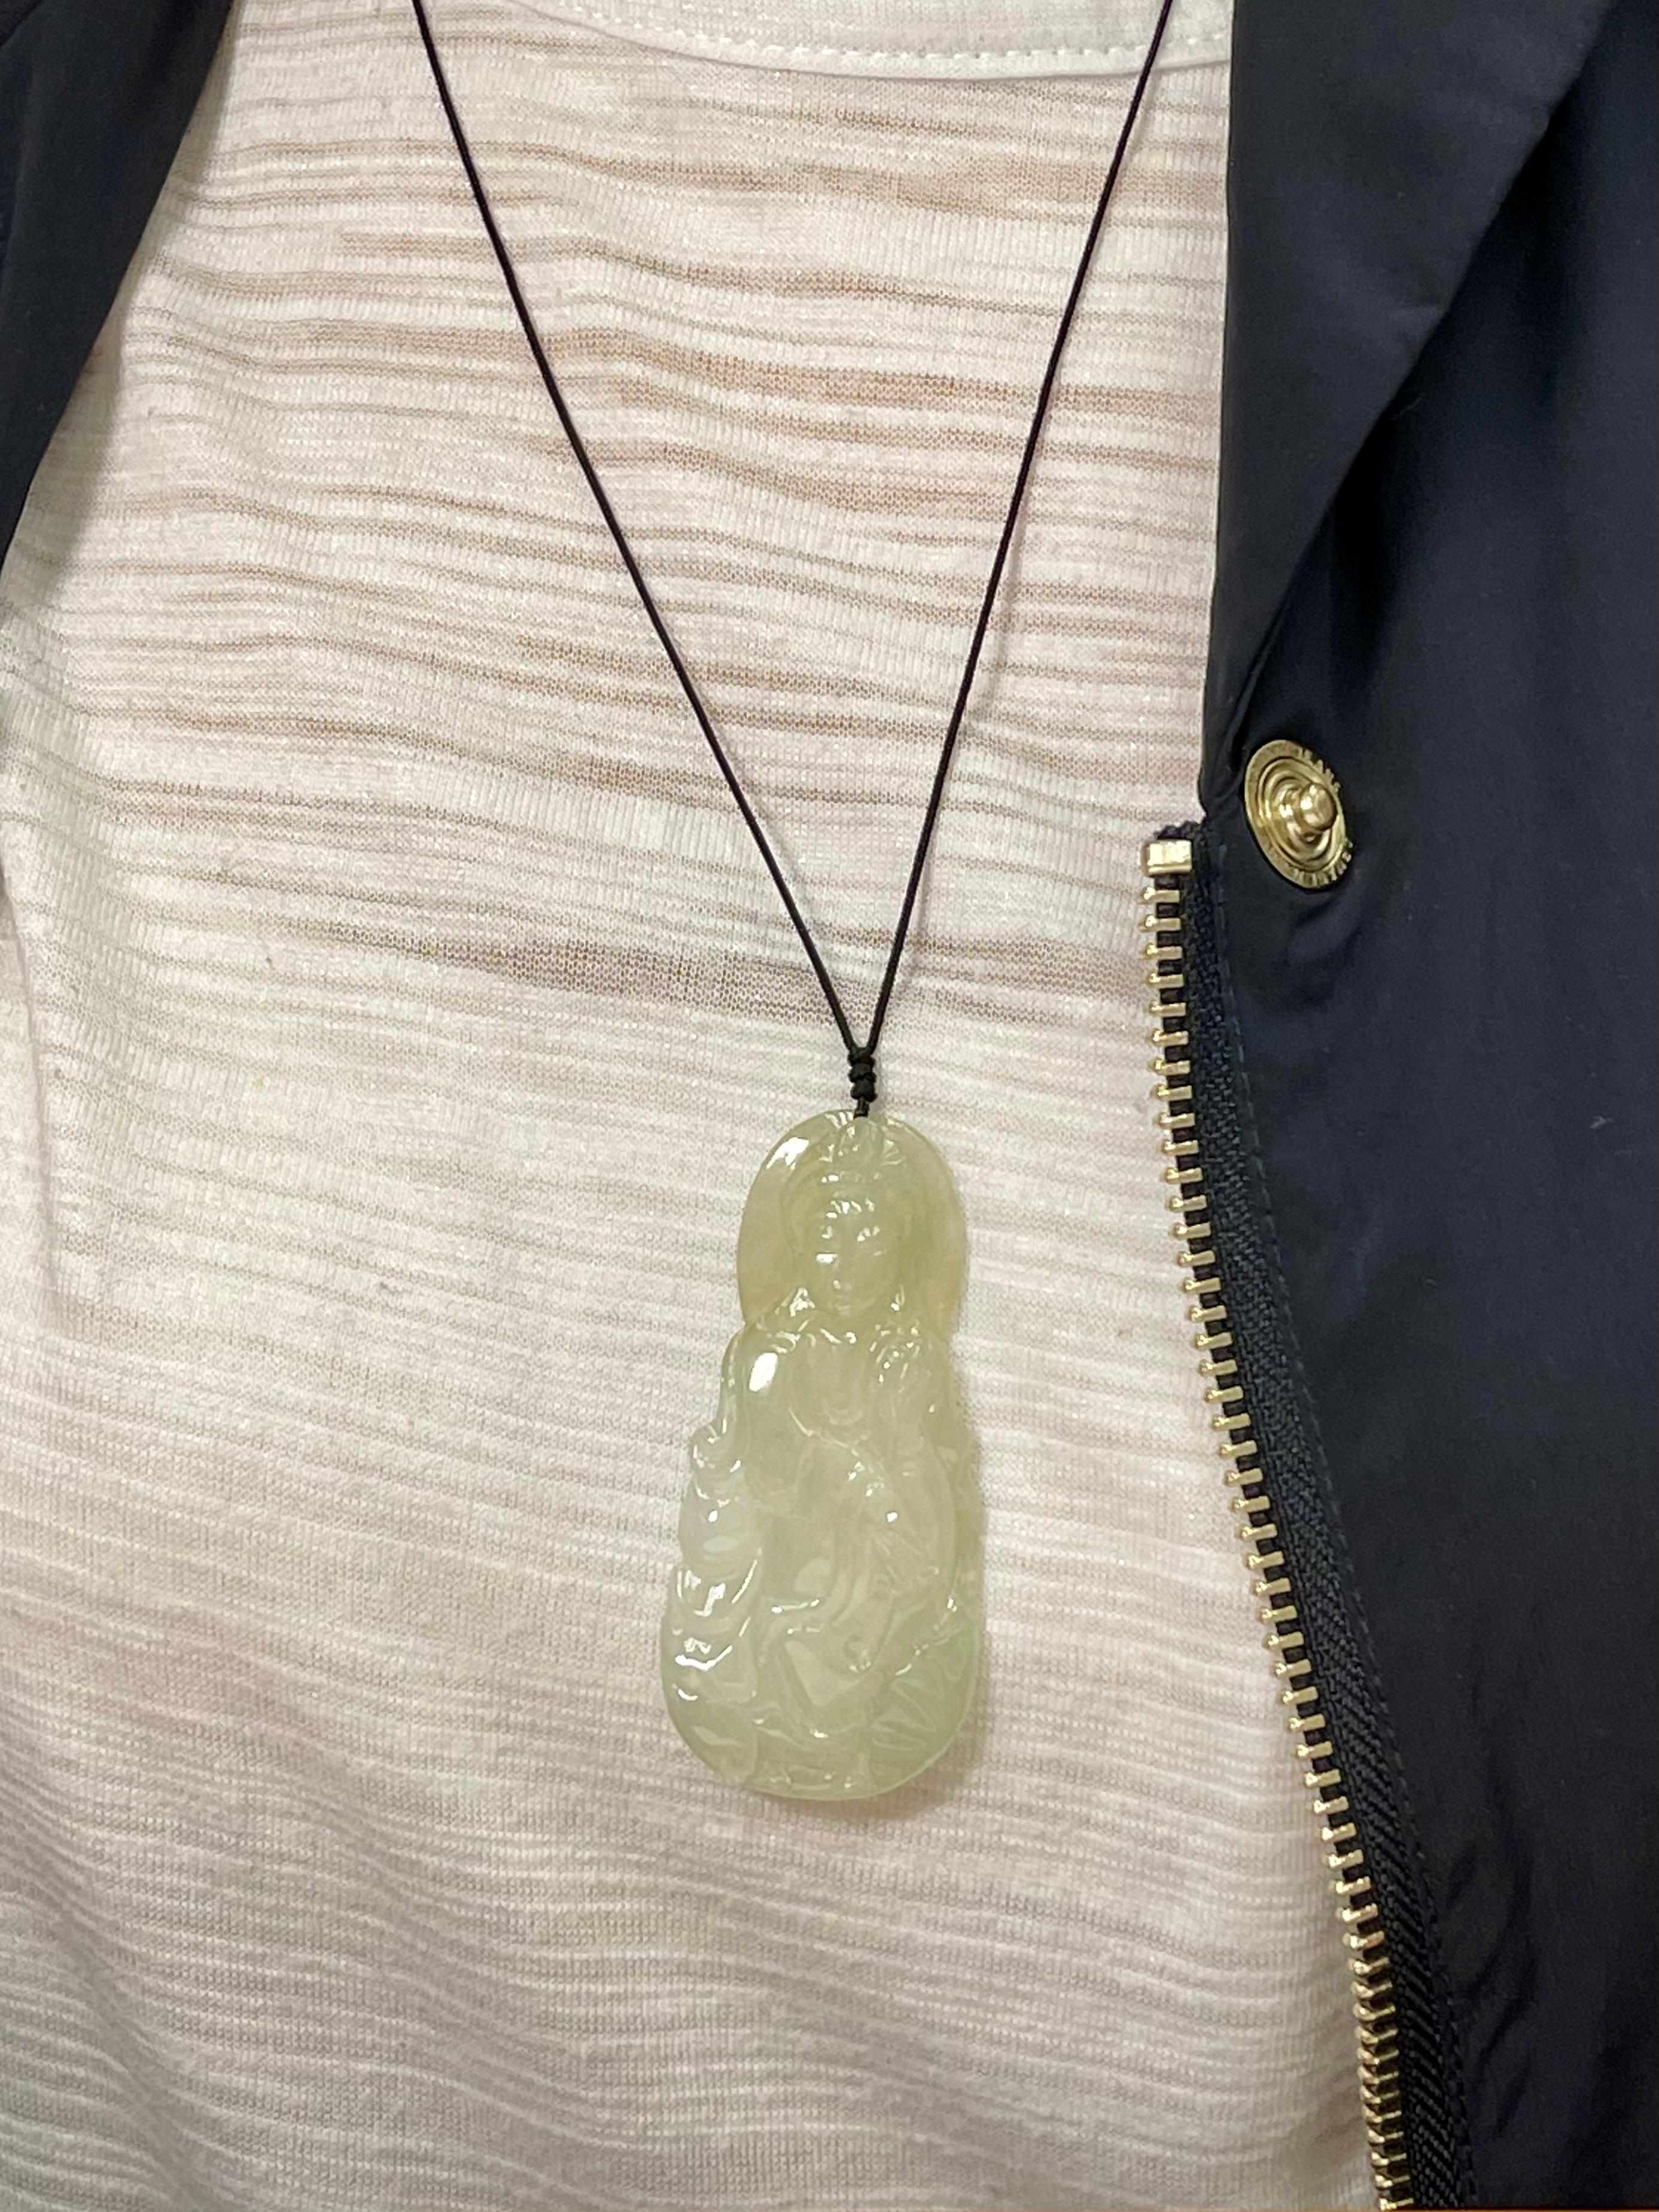 Please check out the HD video! This is a very well carved Kwan Yin jadeite Jade pendant. It is certified. The lines and details of this piece are excellent. This natural jadeite Jade pendant is colorless and transparent, also know as icy jade. This